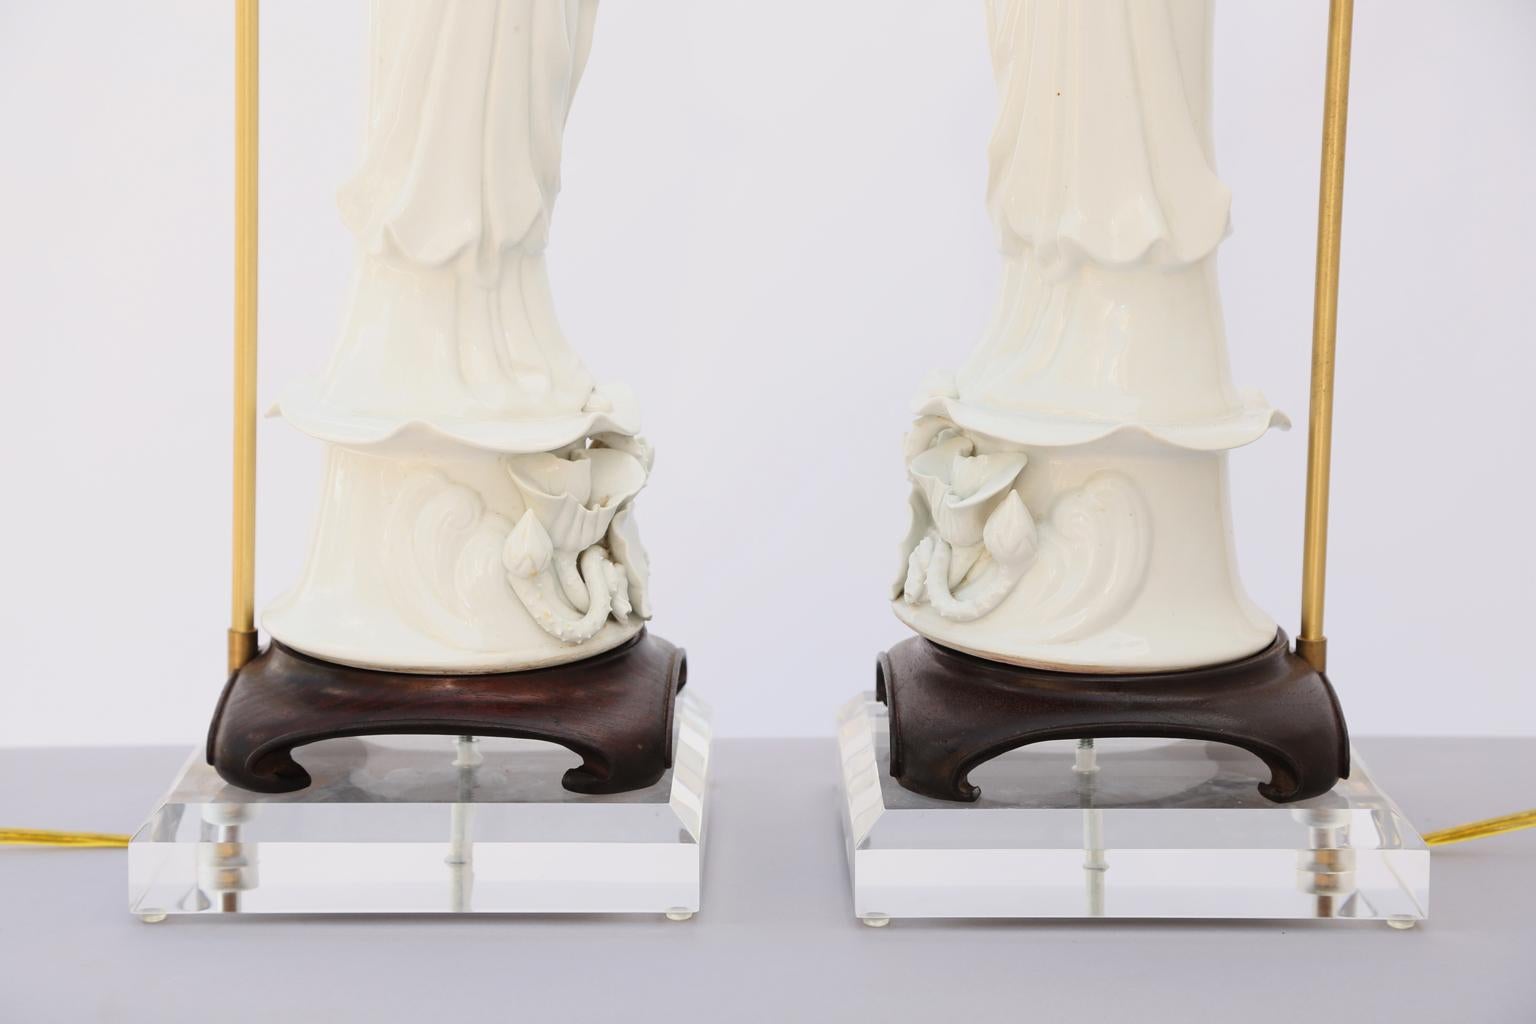 19th Century Monumental Pair of Blanc de Chine Kwan Yin Figural Lamps on Lucite Bases